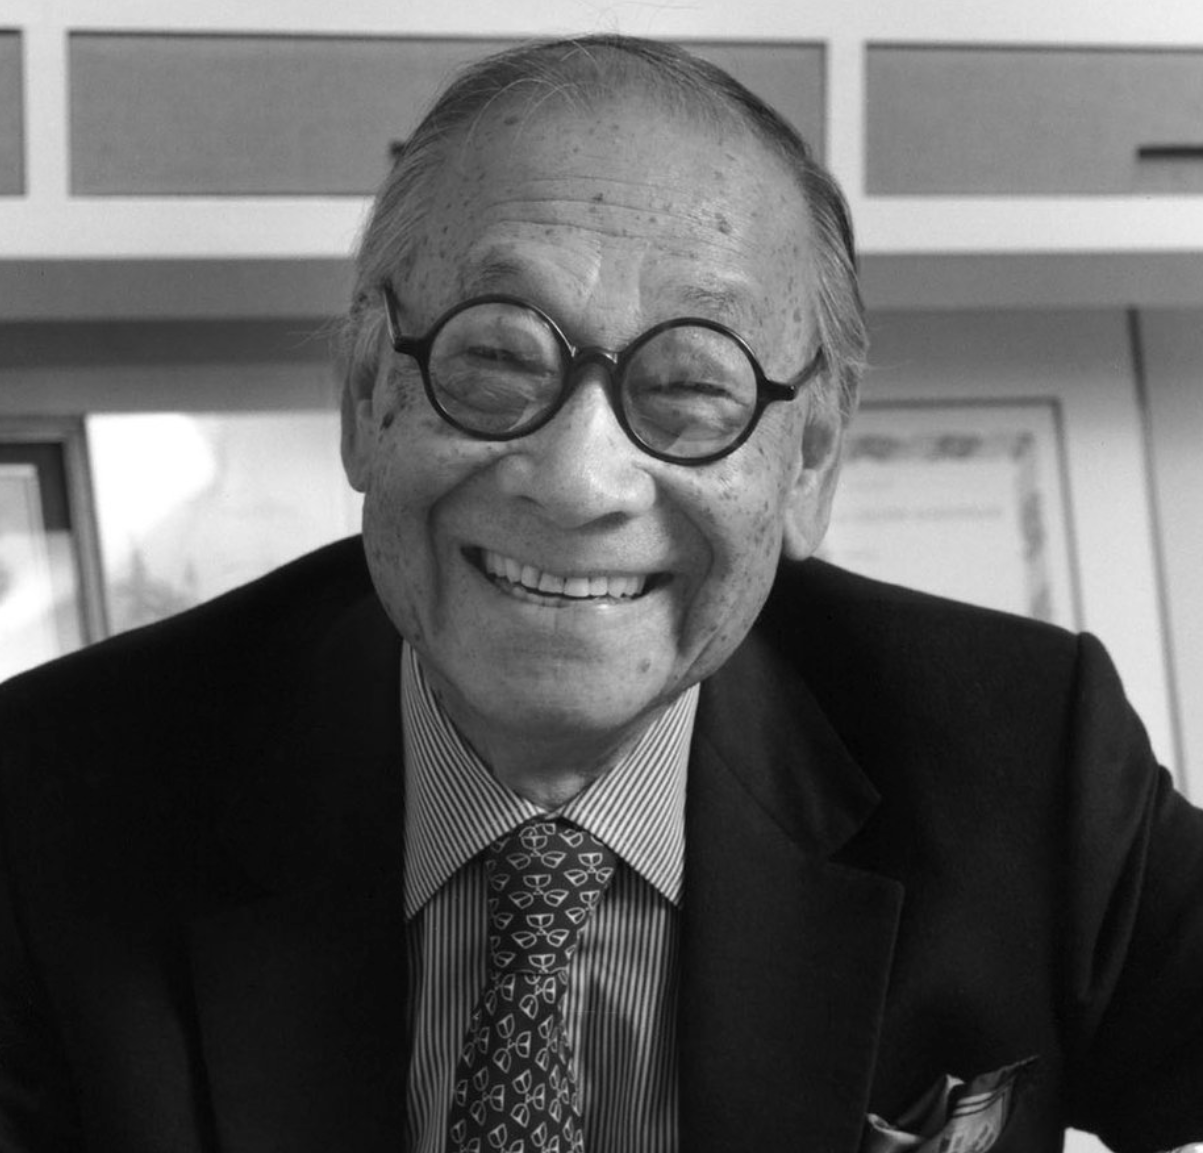 I.M. Pei's signature round spectacles frame his eyes, and the rest of his face is in a friendly smile